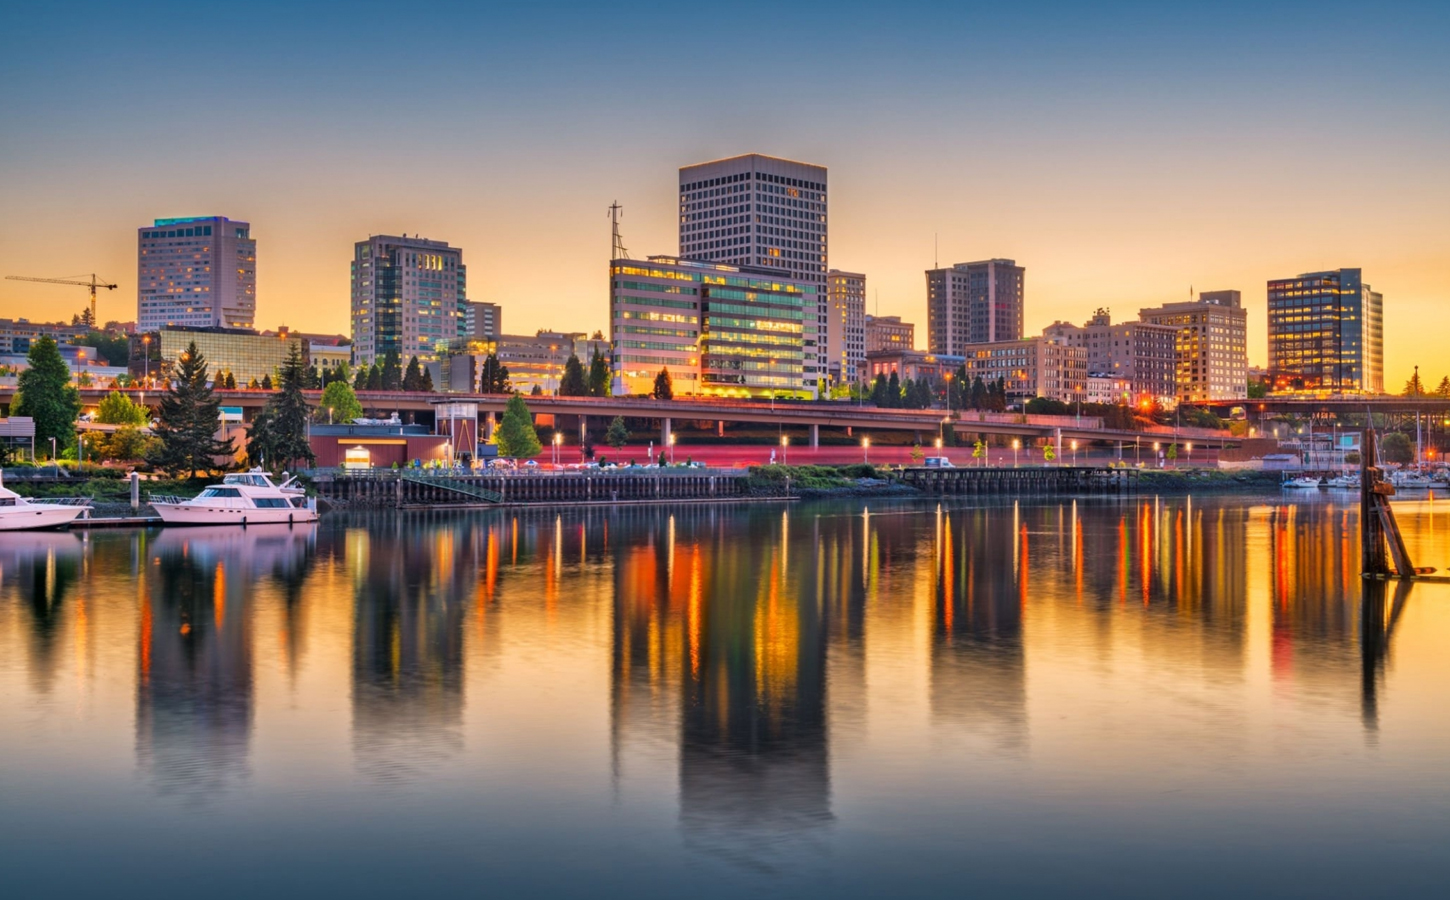 A stunning sunset over Tacoma, Washington, USA, with a beautiful cityscape reflecting on the water, demonstrating the complete guide to moving to Tacoma.